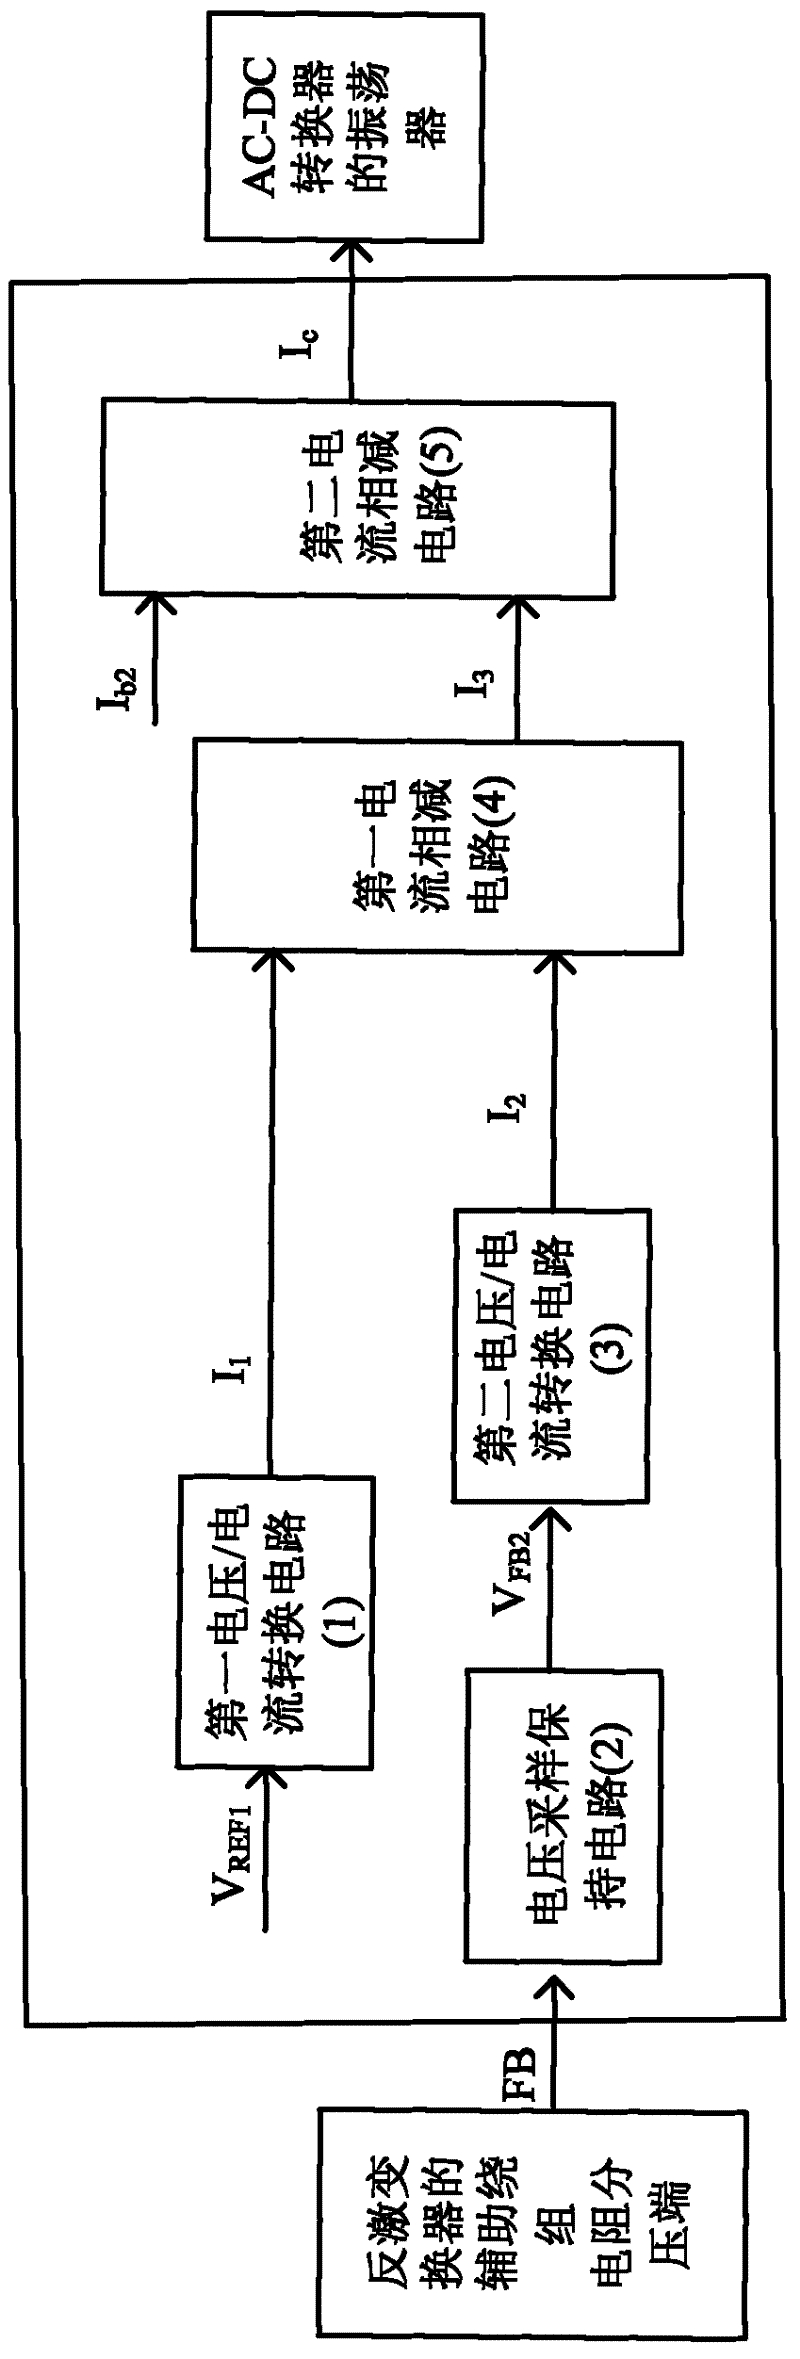 pfm constant current control circuit applied in ac-dc converter